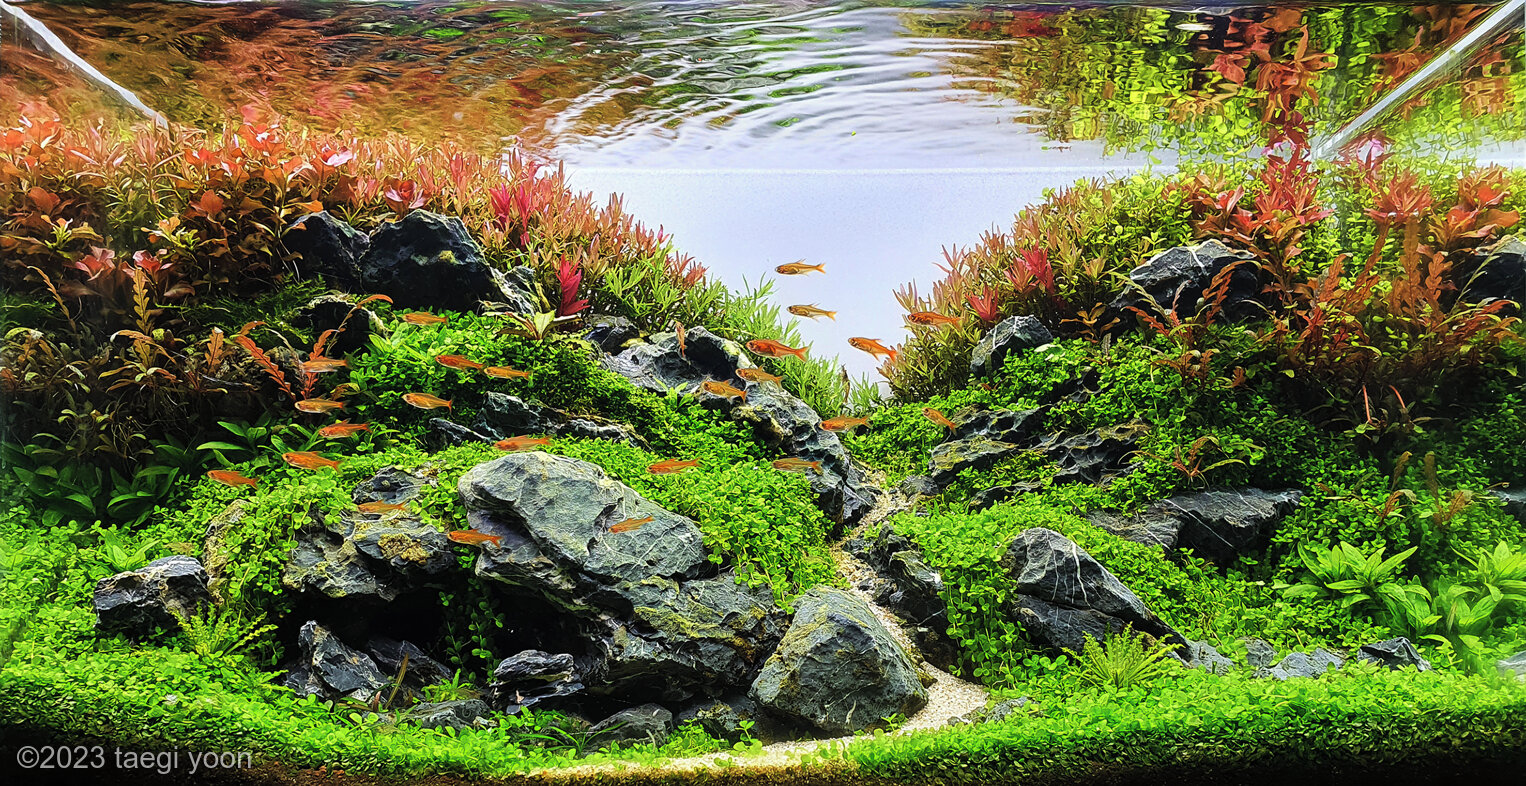 Aquaflora - We are working on the last details to bring this beautiful  Strideways 45P scaped by Balbi during a live aquascaping demo at ANAC  Kick-off in June to Vivarium next weekend!